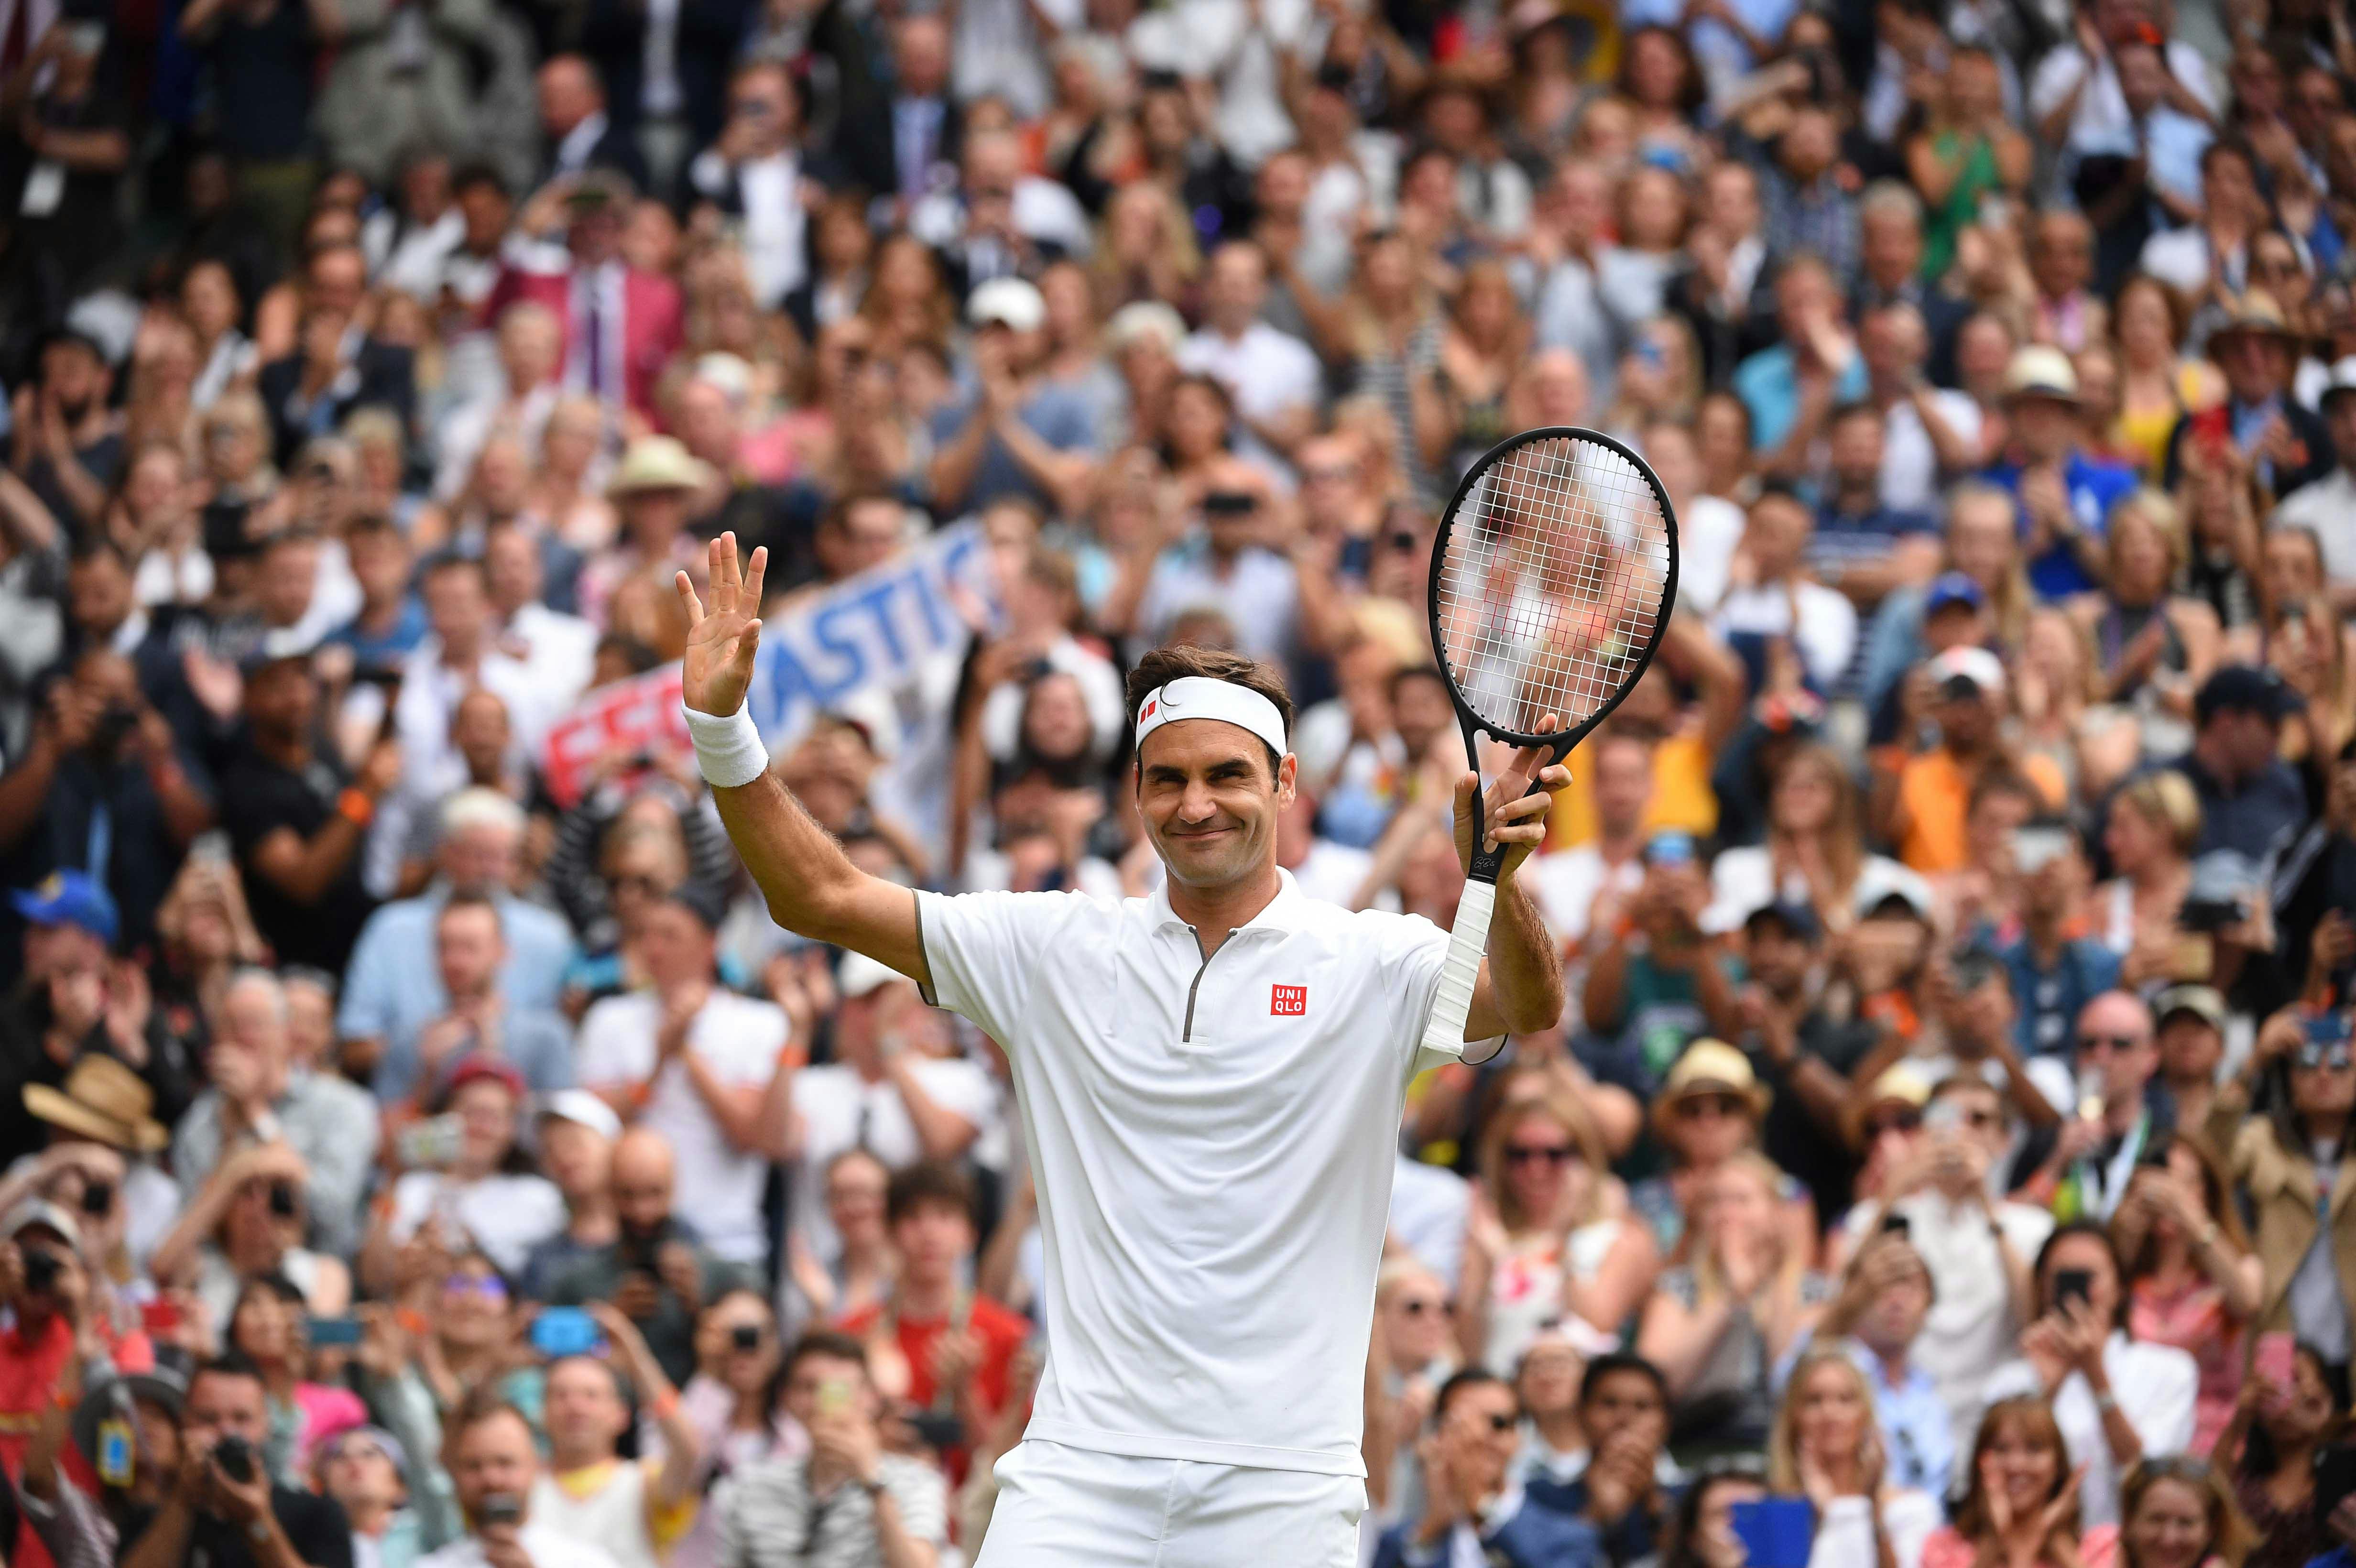 Roger Federer smiling while waving to the crowd after his third round victory at Wimbledon 2019.